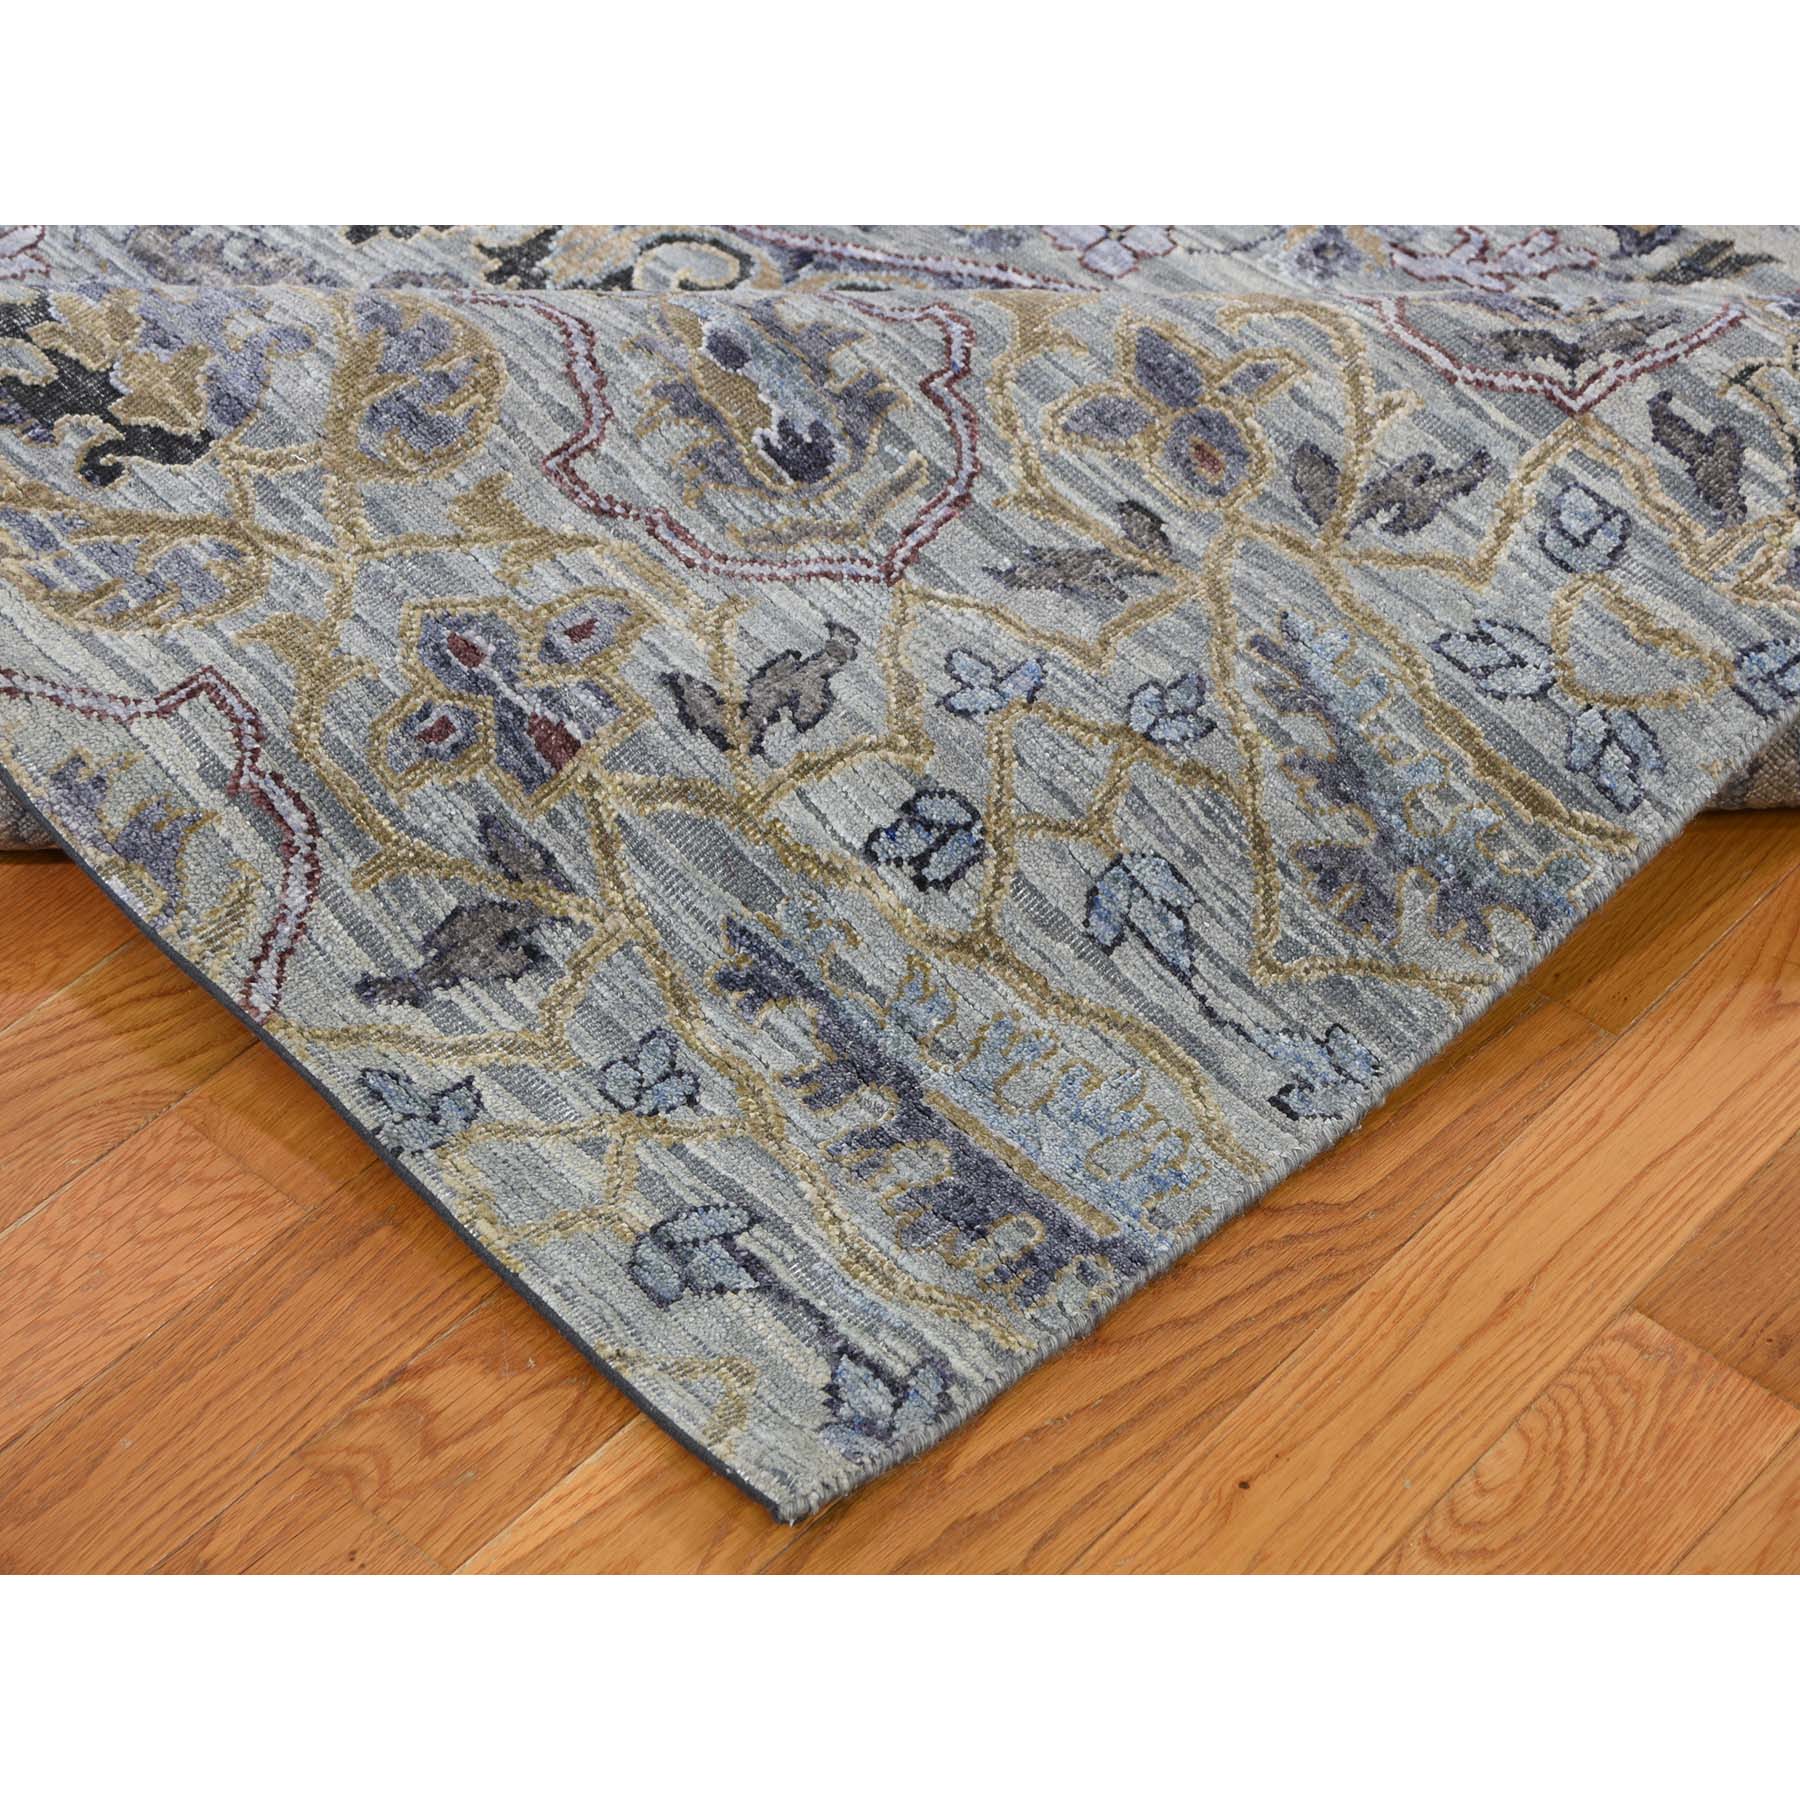 8-10 x12-1  THE MAHARAJA Silk with Textured Wool Hand-Knotted Oriental Rug 